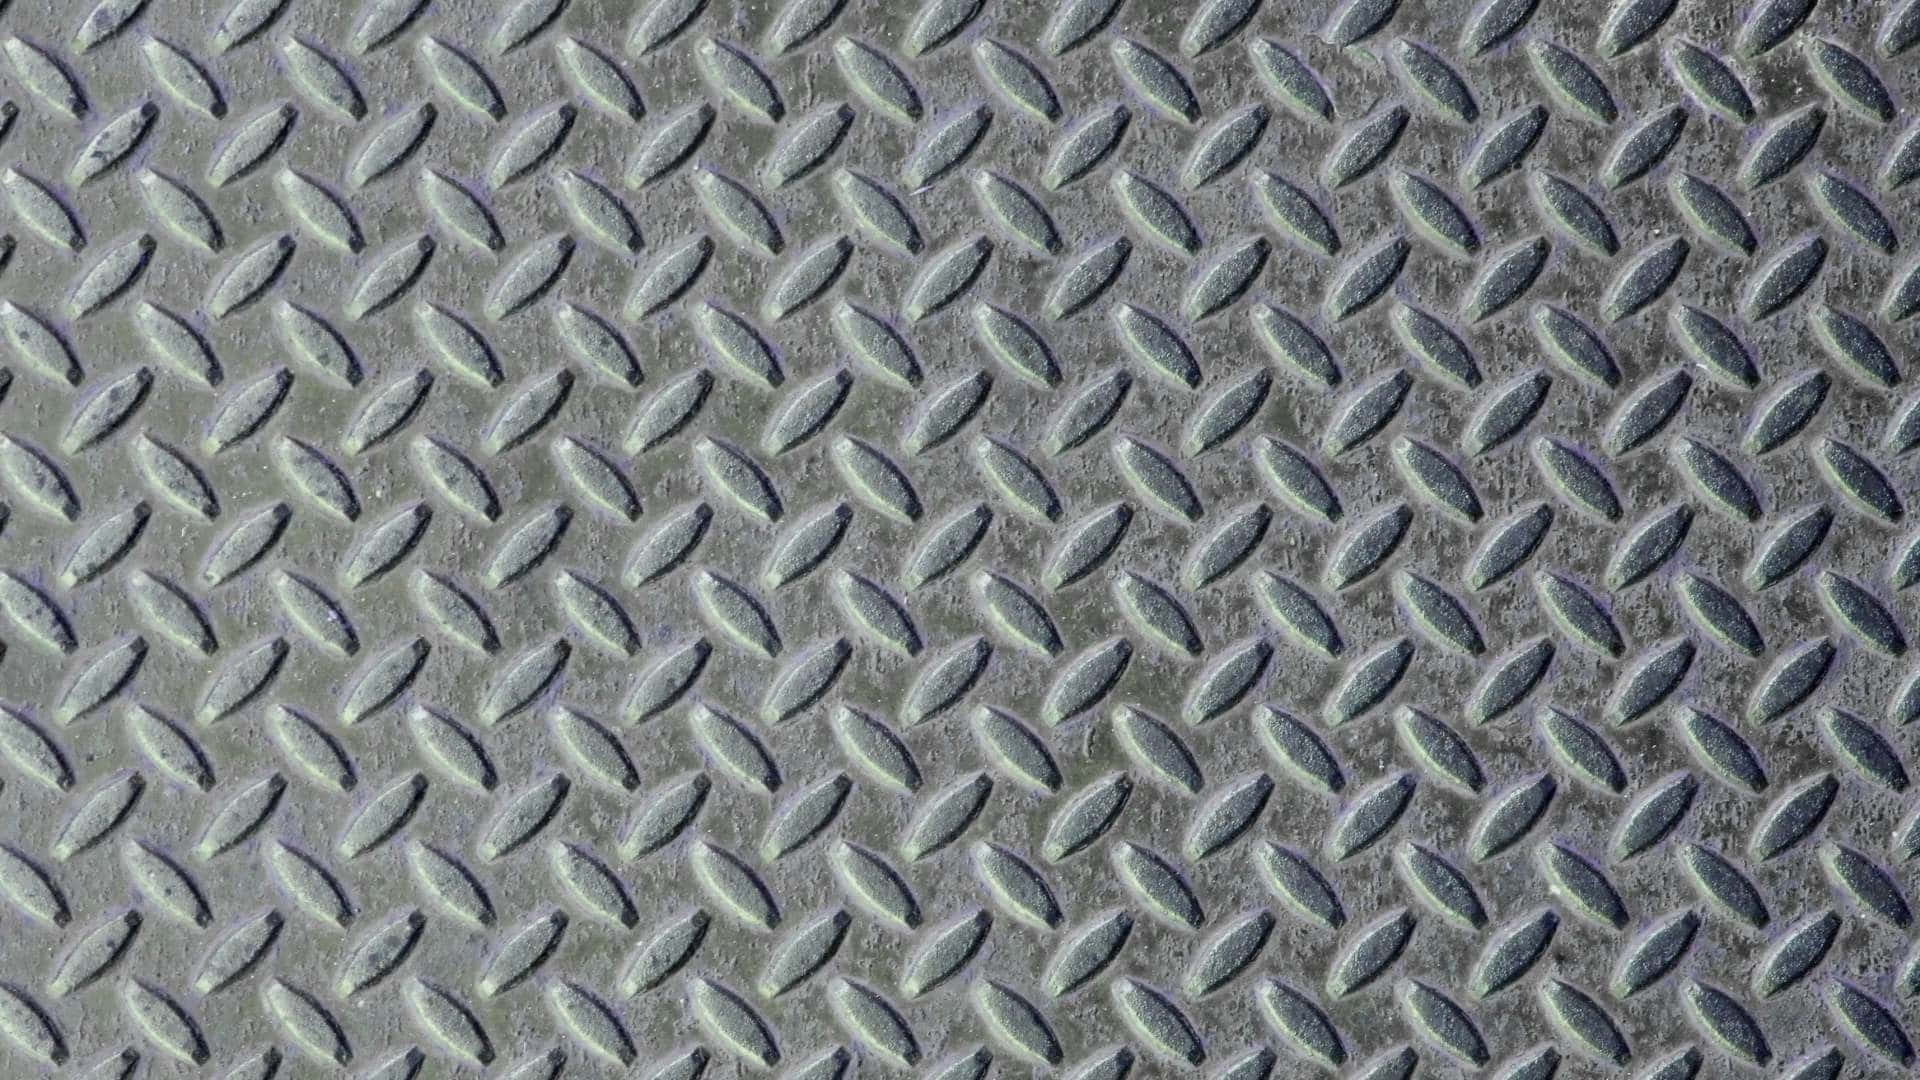 A Close Up Of A Metal Plate With Diamonds